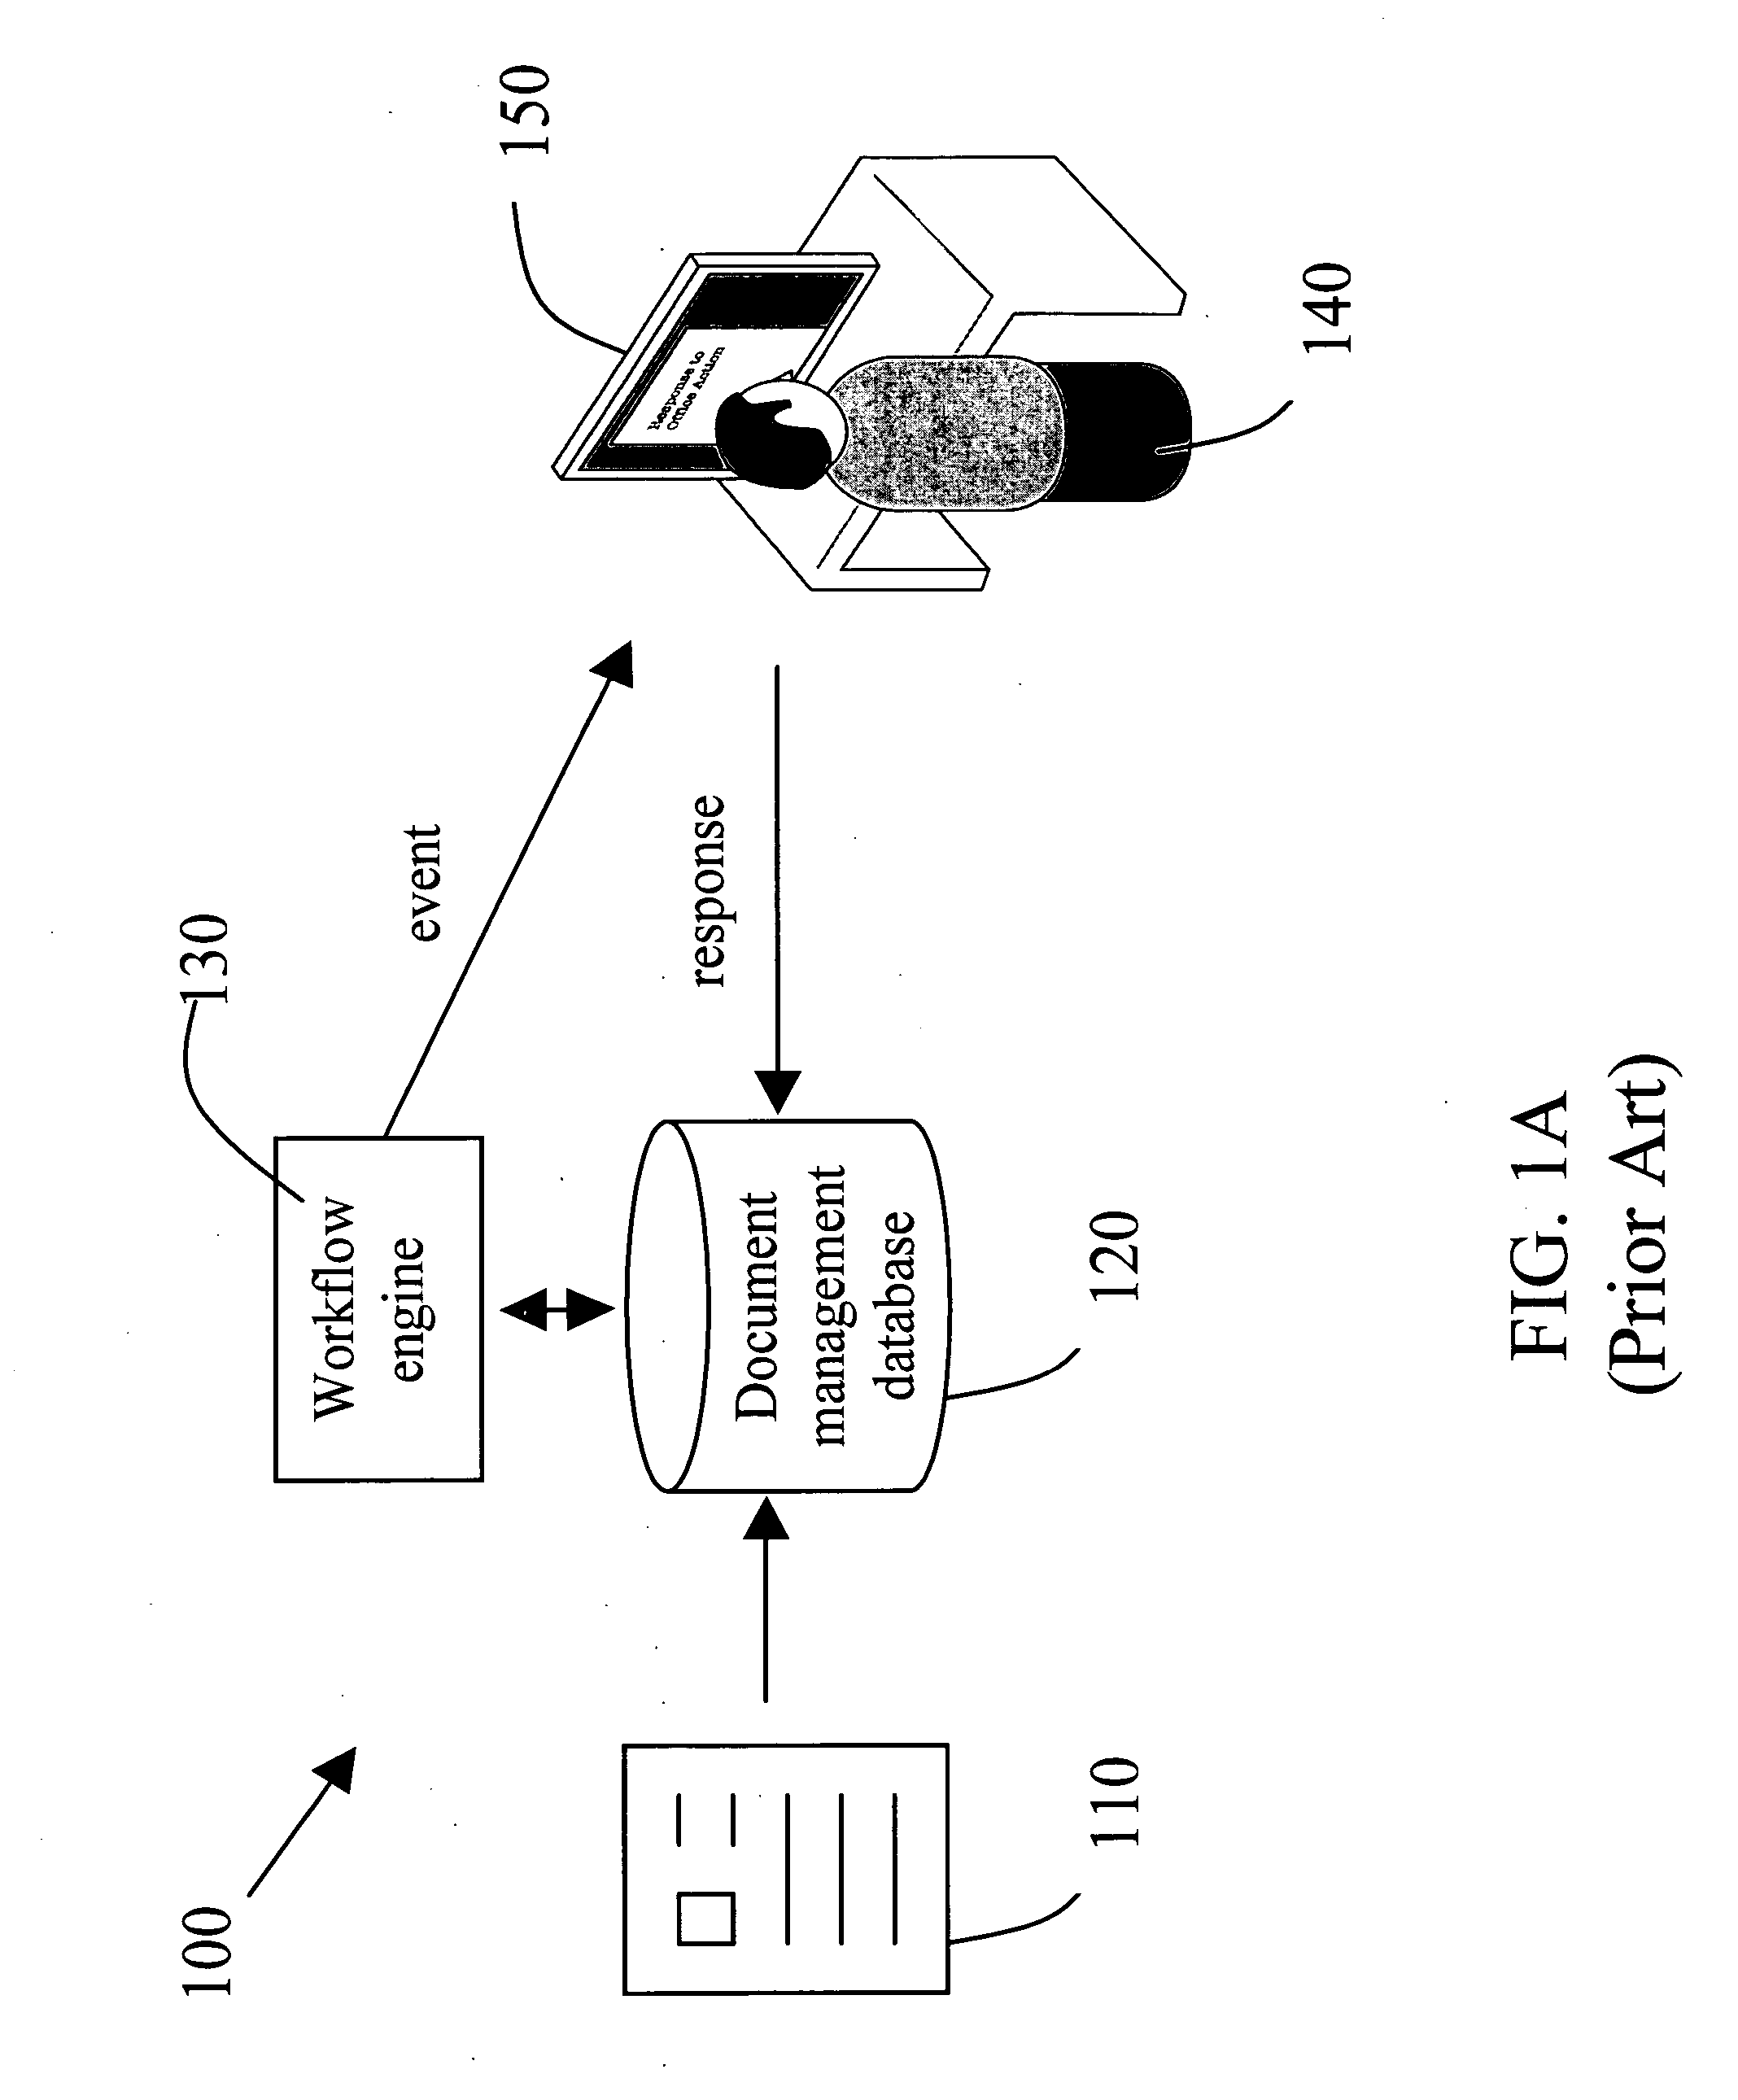 Adaptive document management system using a physical representation of a document